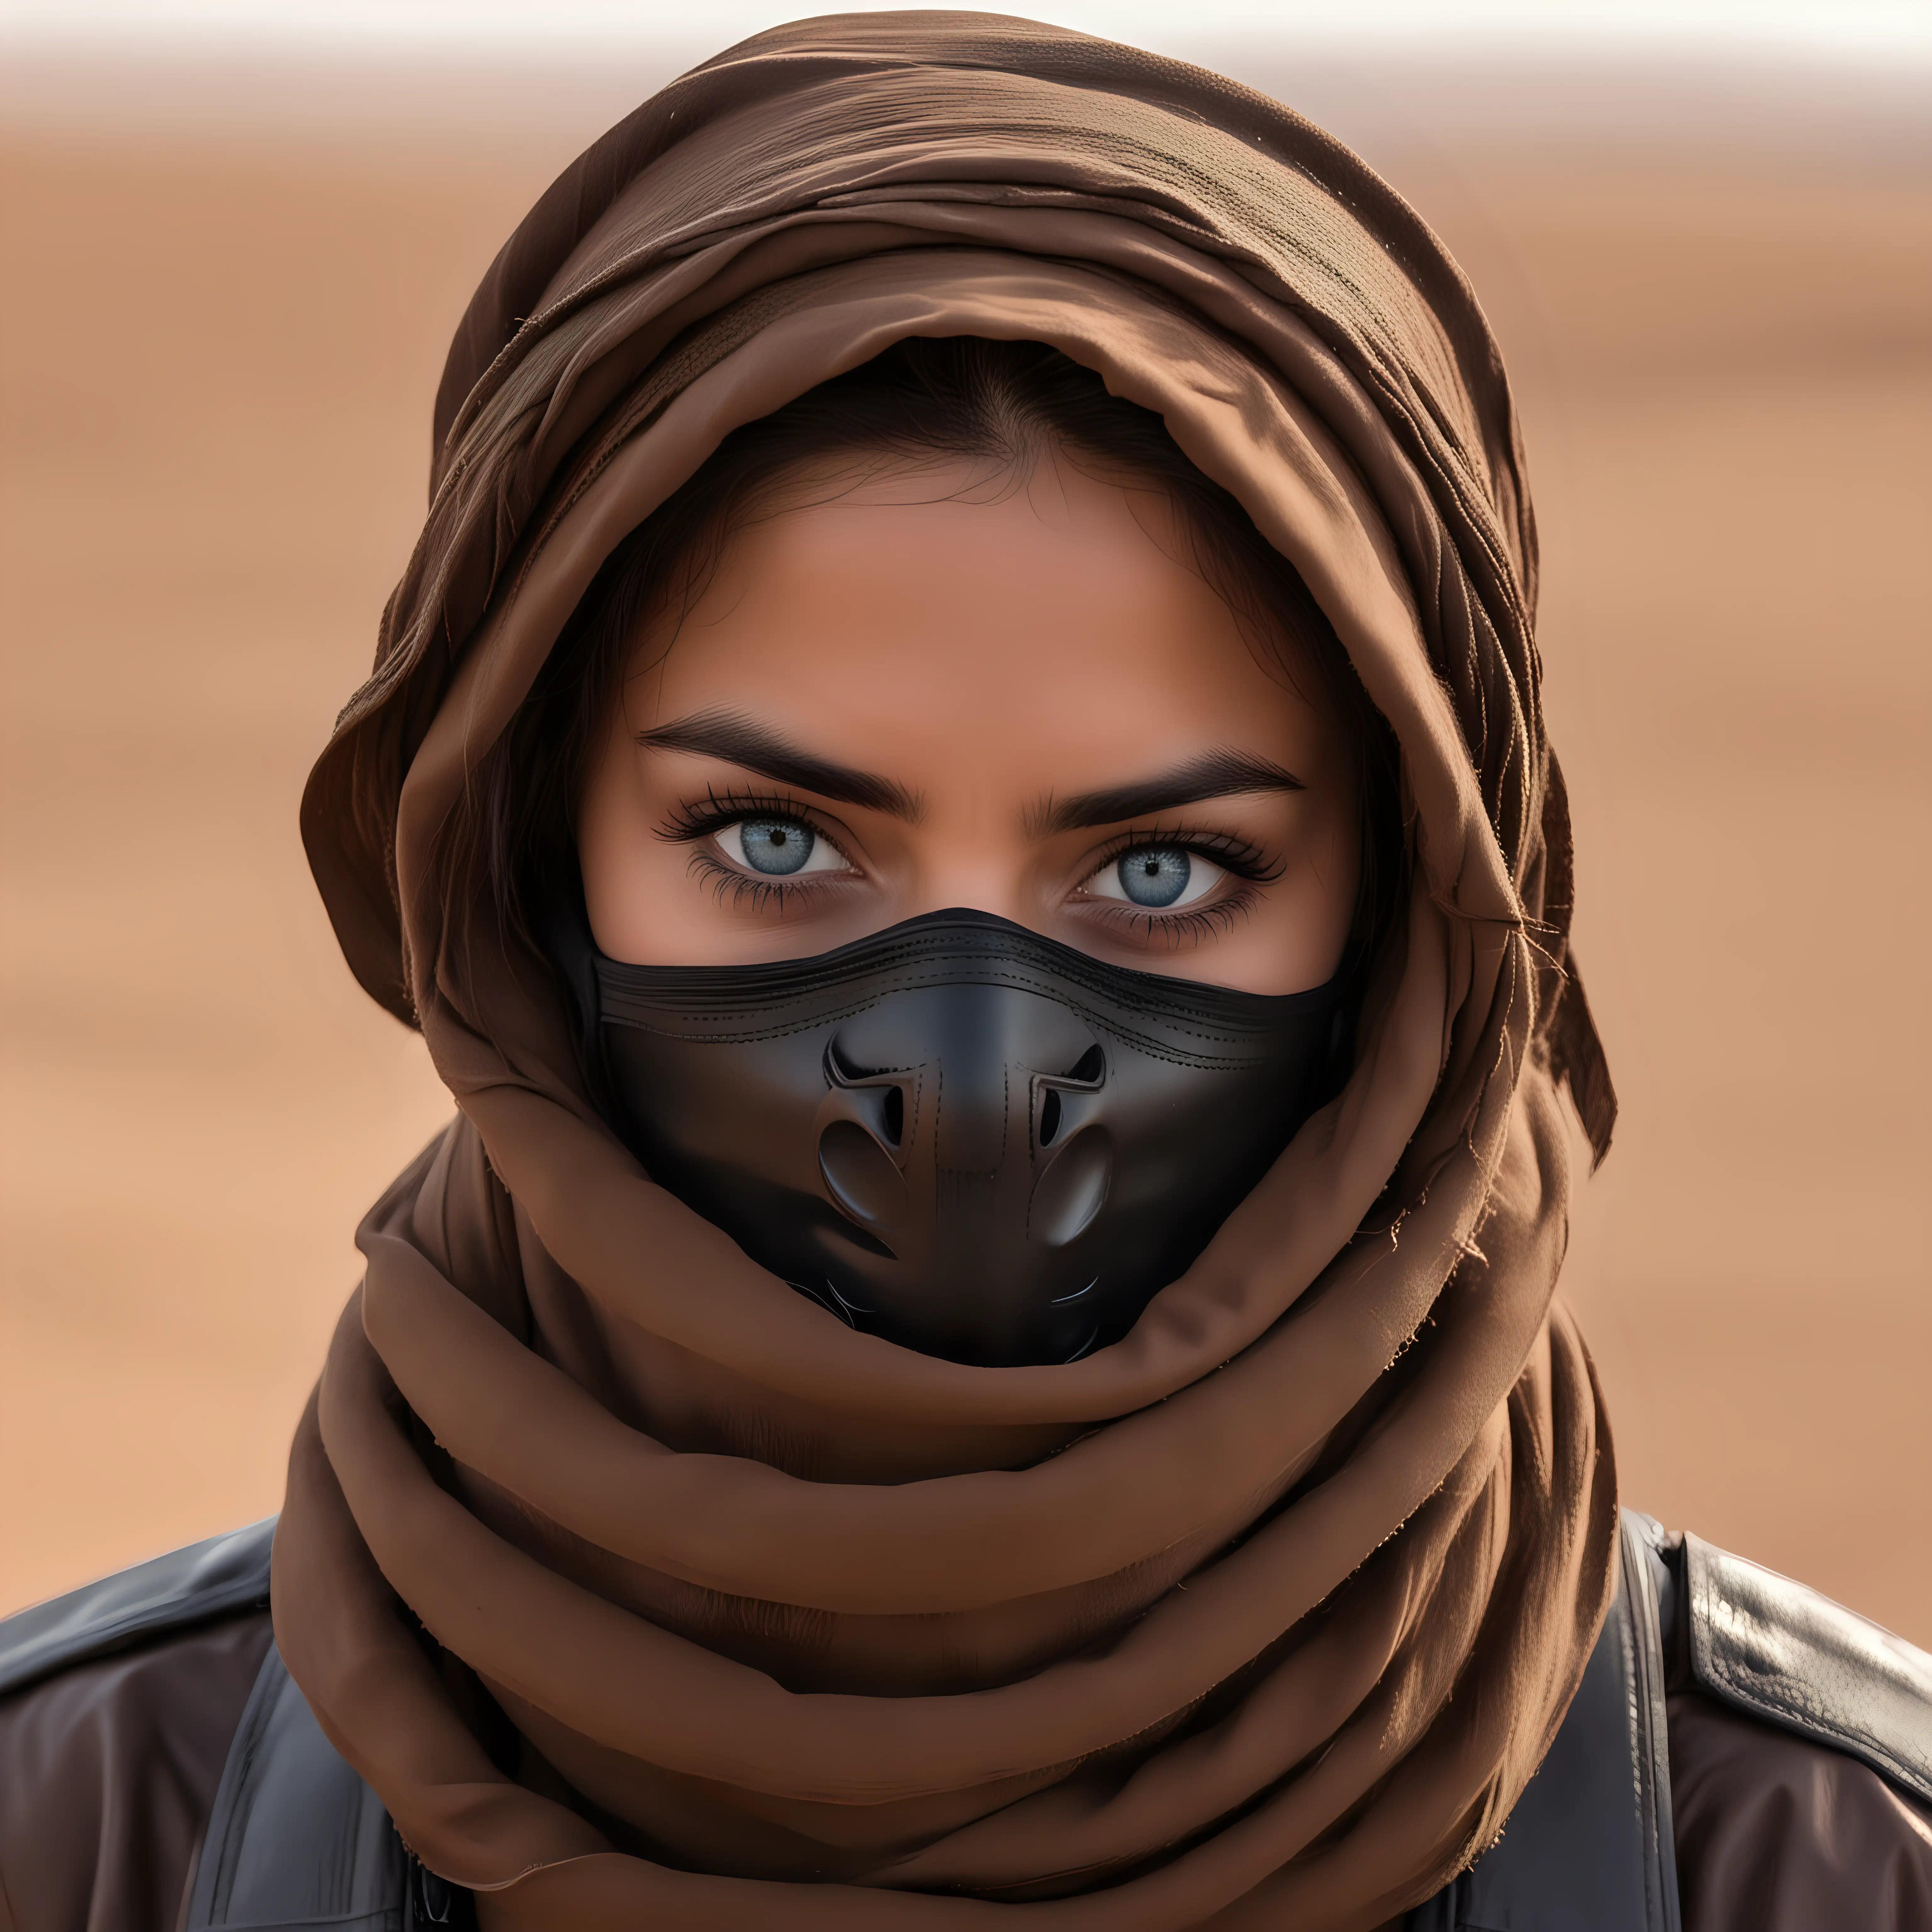  full portrait dark-skinned woman with blue-on-blue eyes (blue sclera), wearing brown leather and a black Dune-style breathing mask covering her lower face and a dust scarf over her head. desert background